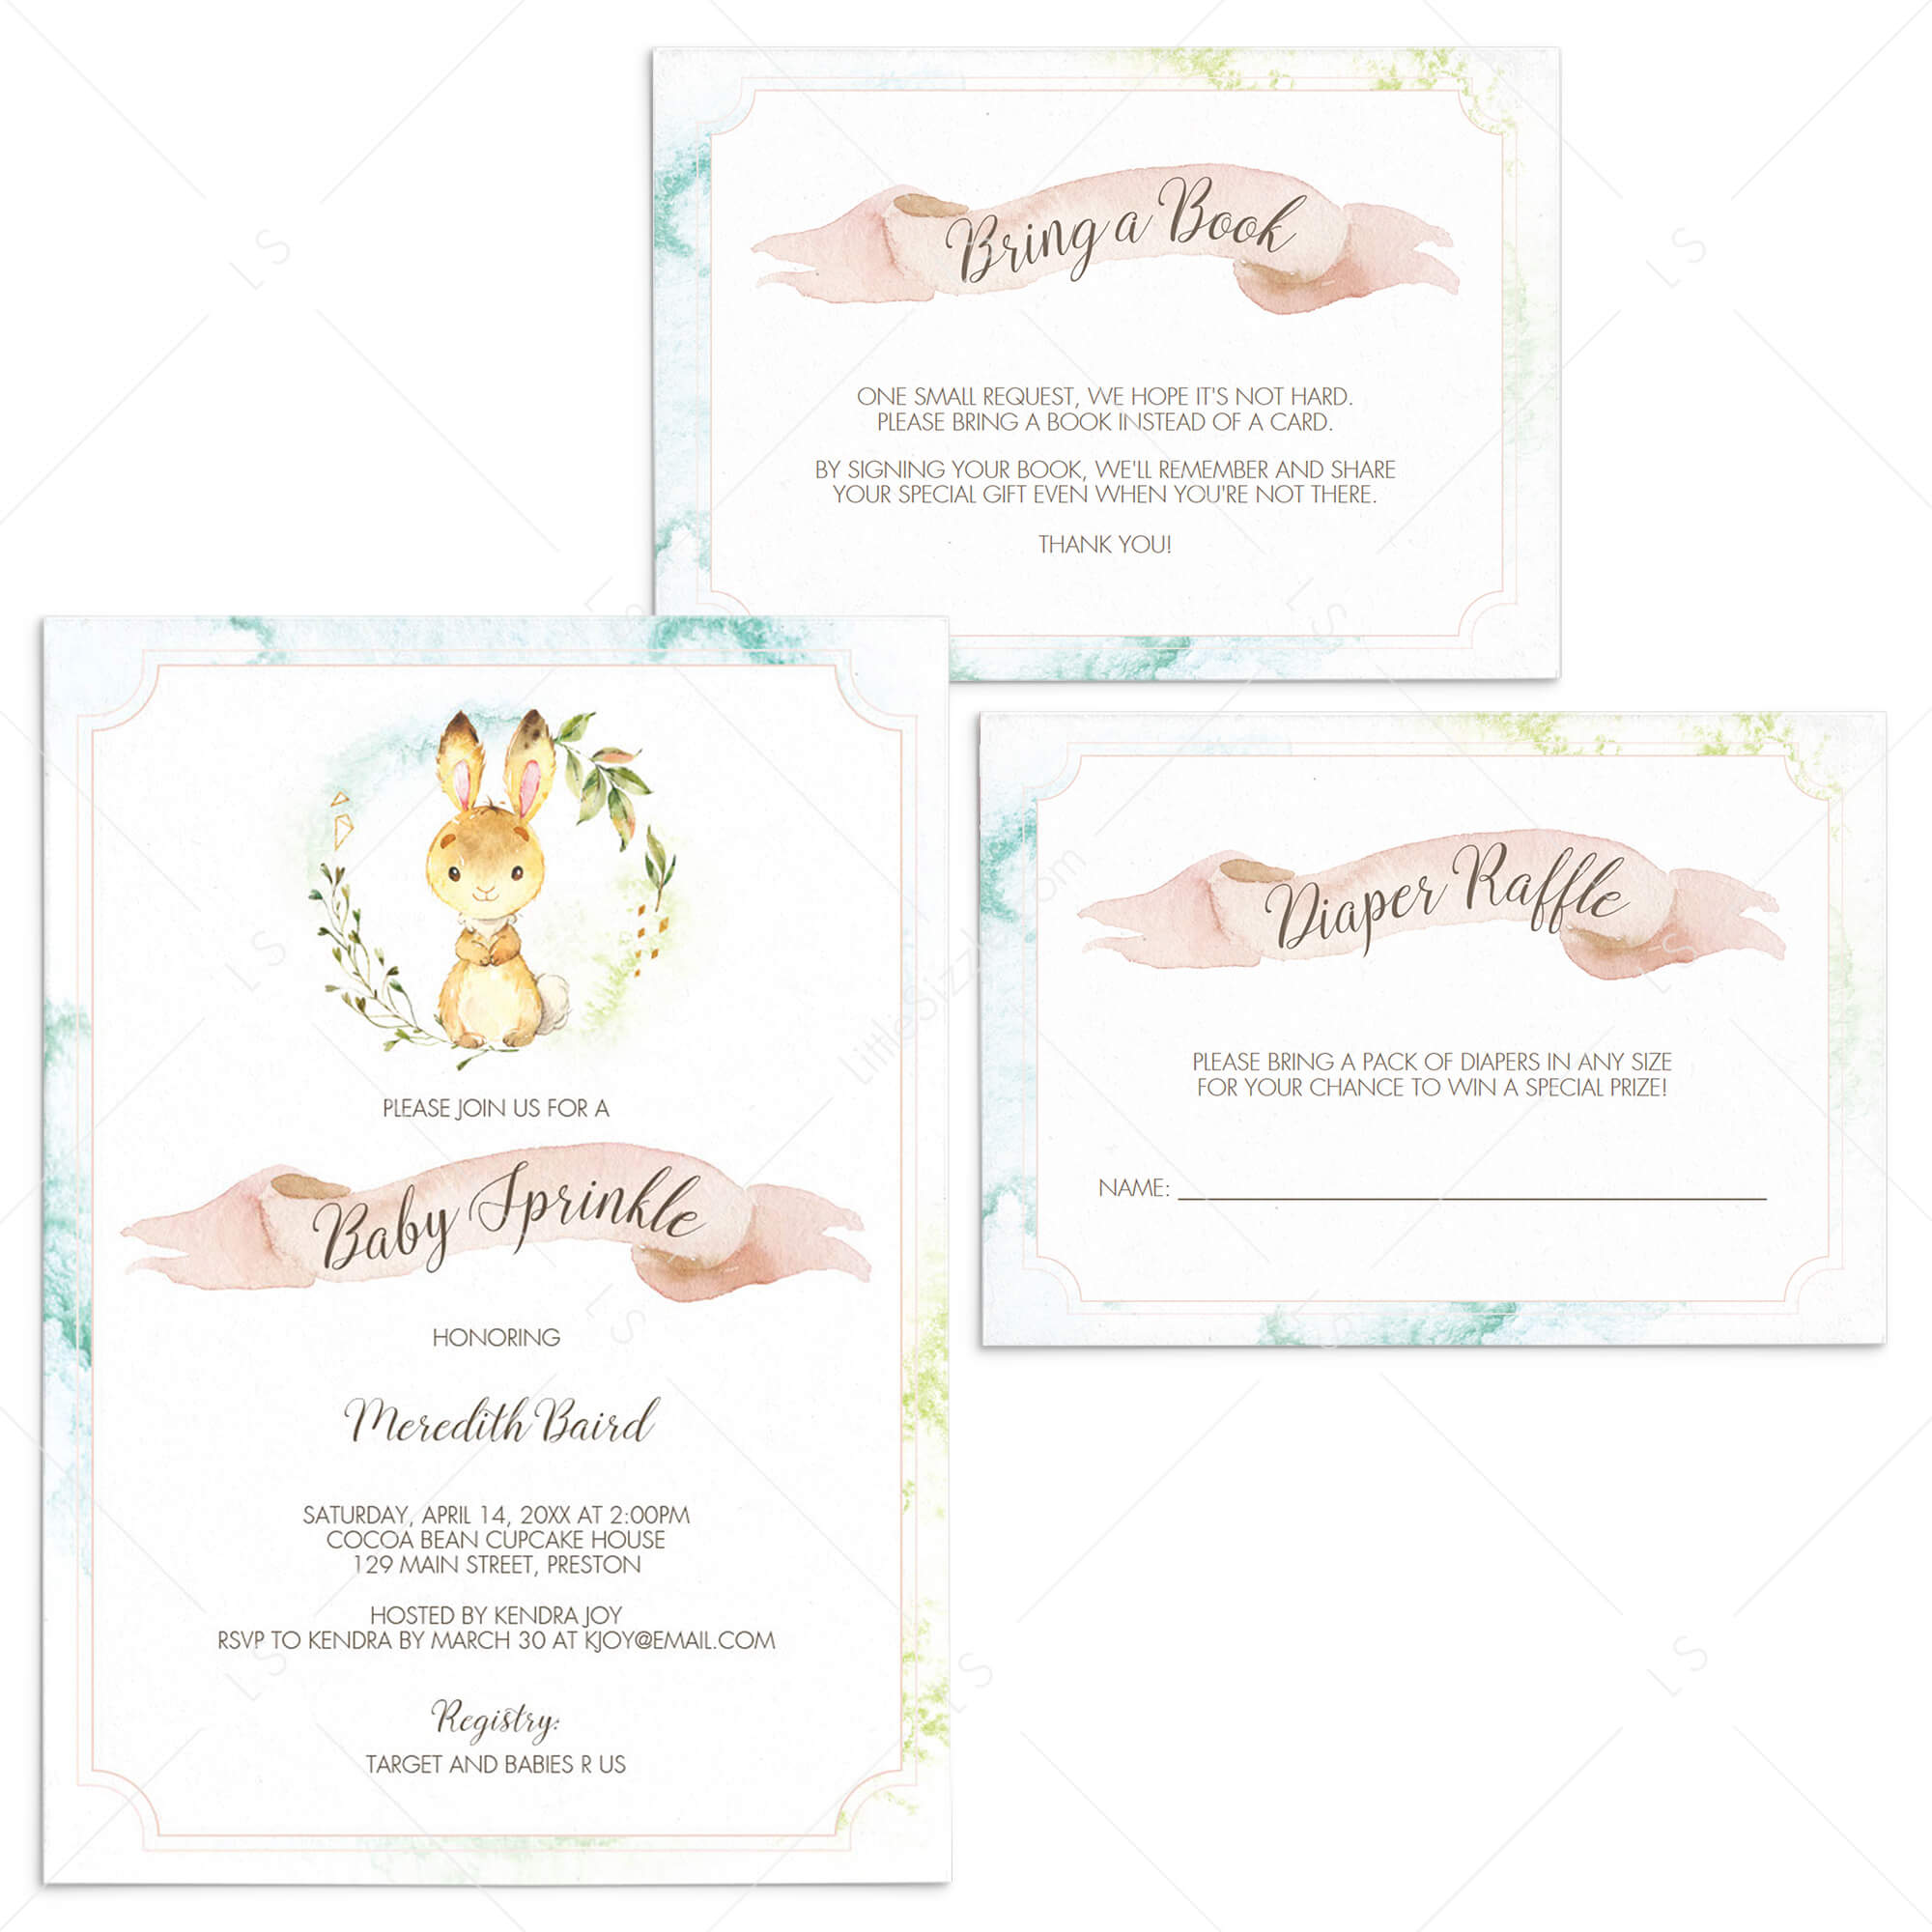 Baby Bunny Baby Sprinkle Invitation Bundle Template by LittleSizzle